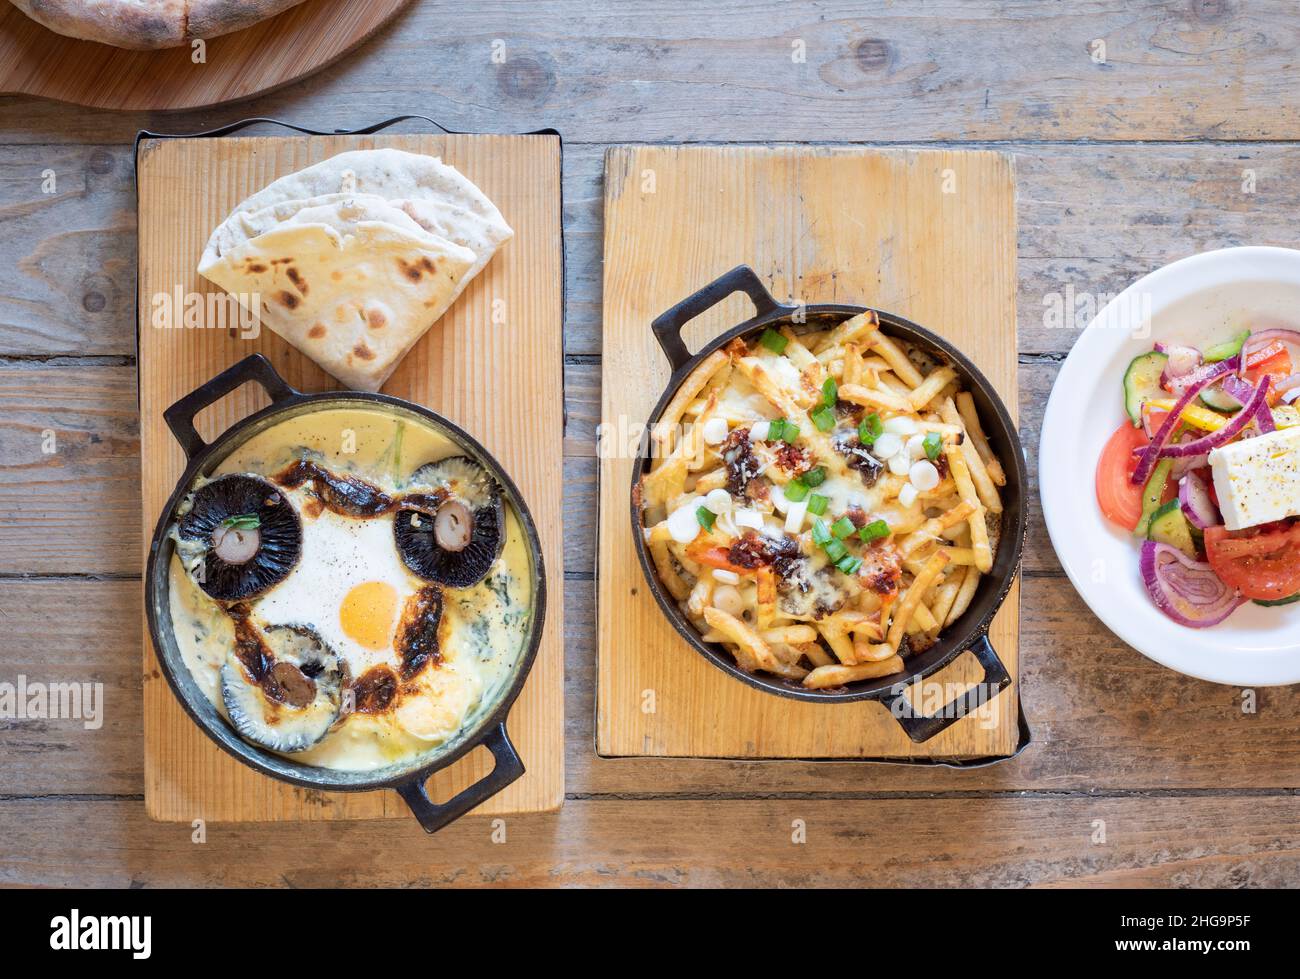 Delicious artisan cast iron skillet cheesy egg and mushroom sizzler and loaded fries, shot from above Stock Photo